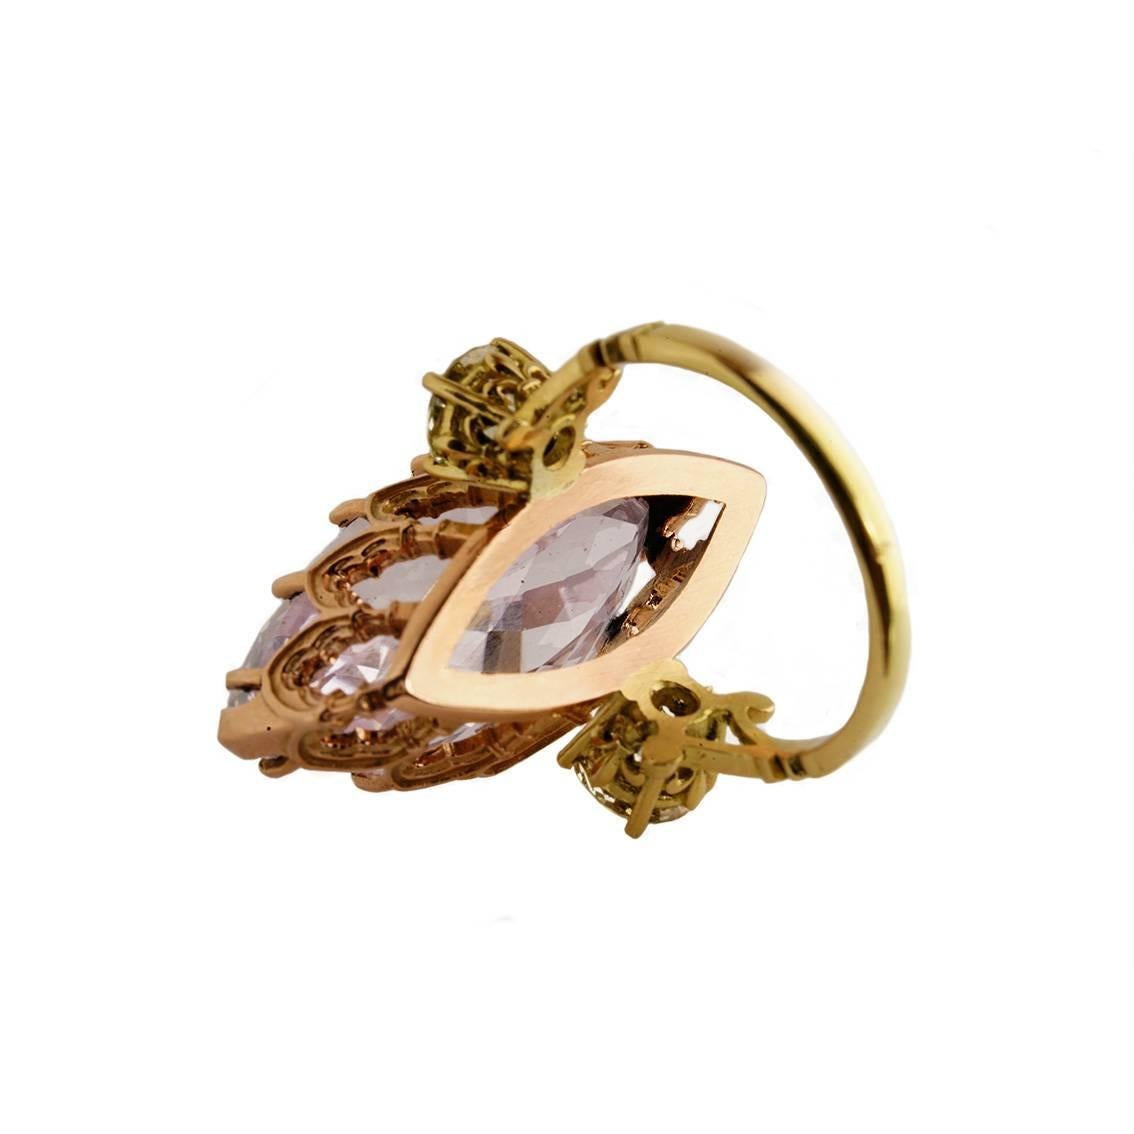 Irrevocable Obsession Ring in 18kt Yellow & Rose Gold with Morganite & Diamonds (Marquiseschliff) im Angebot